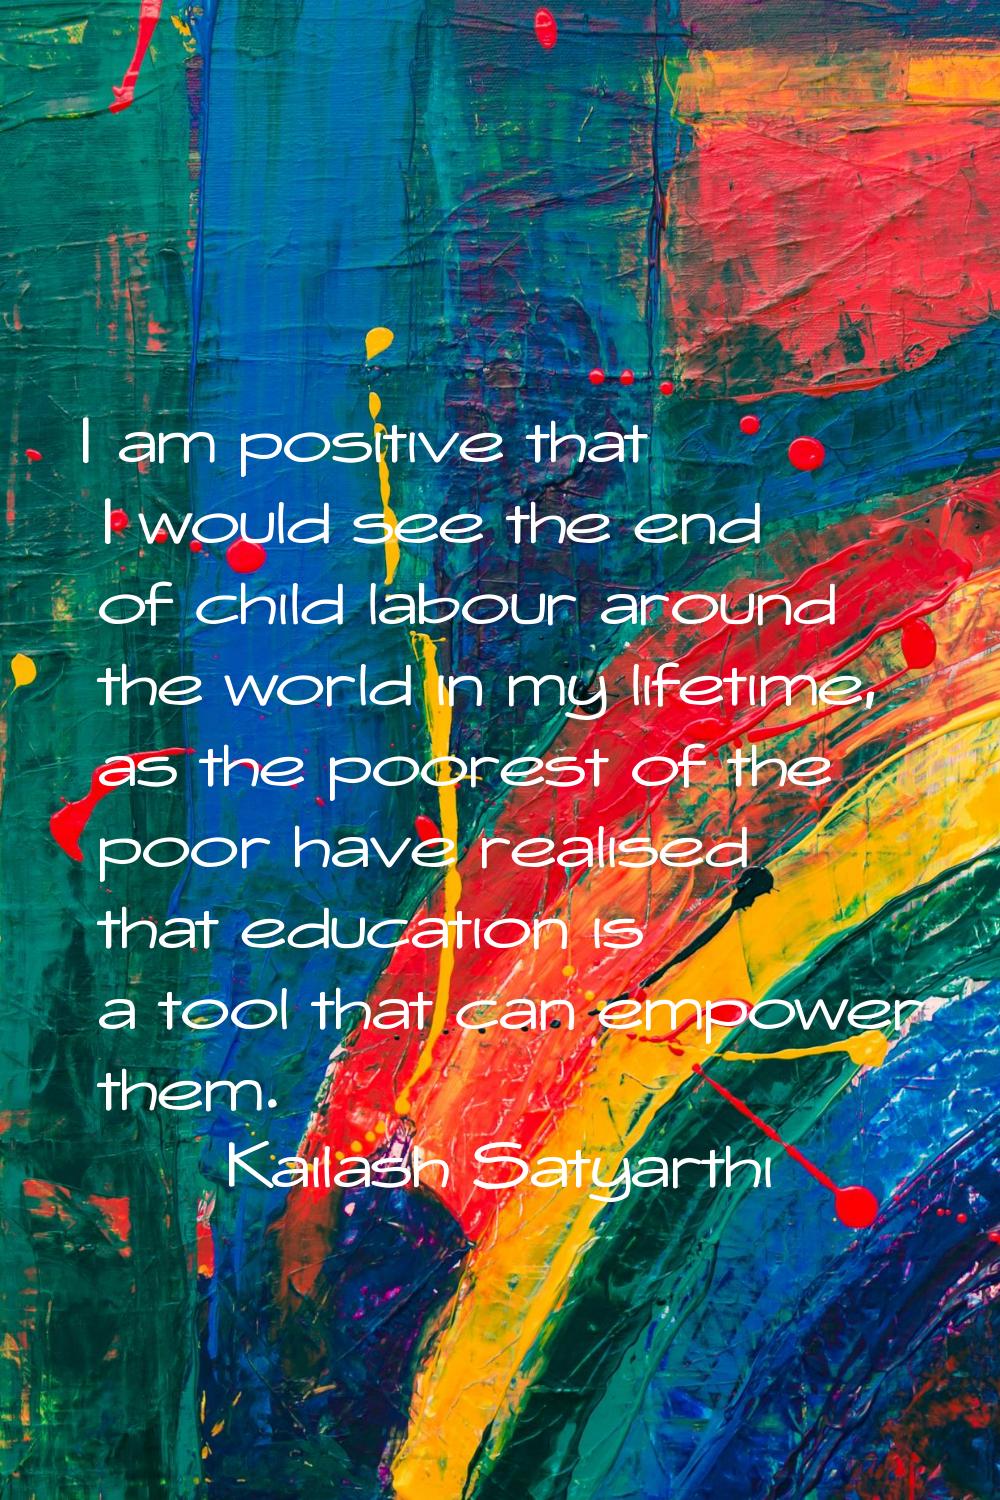 I am positive that I would see the end of child labour around the world in my lifetime, as the poor